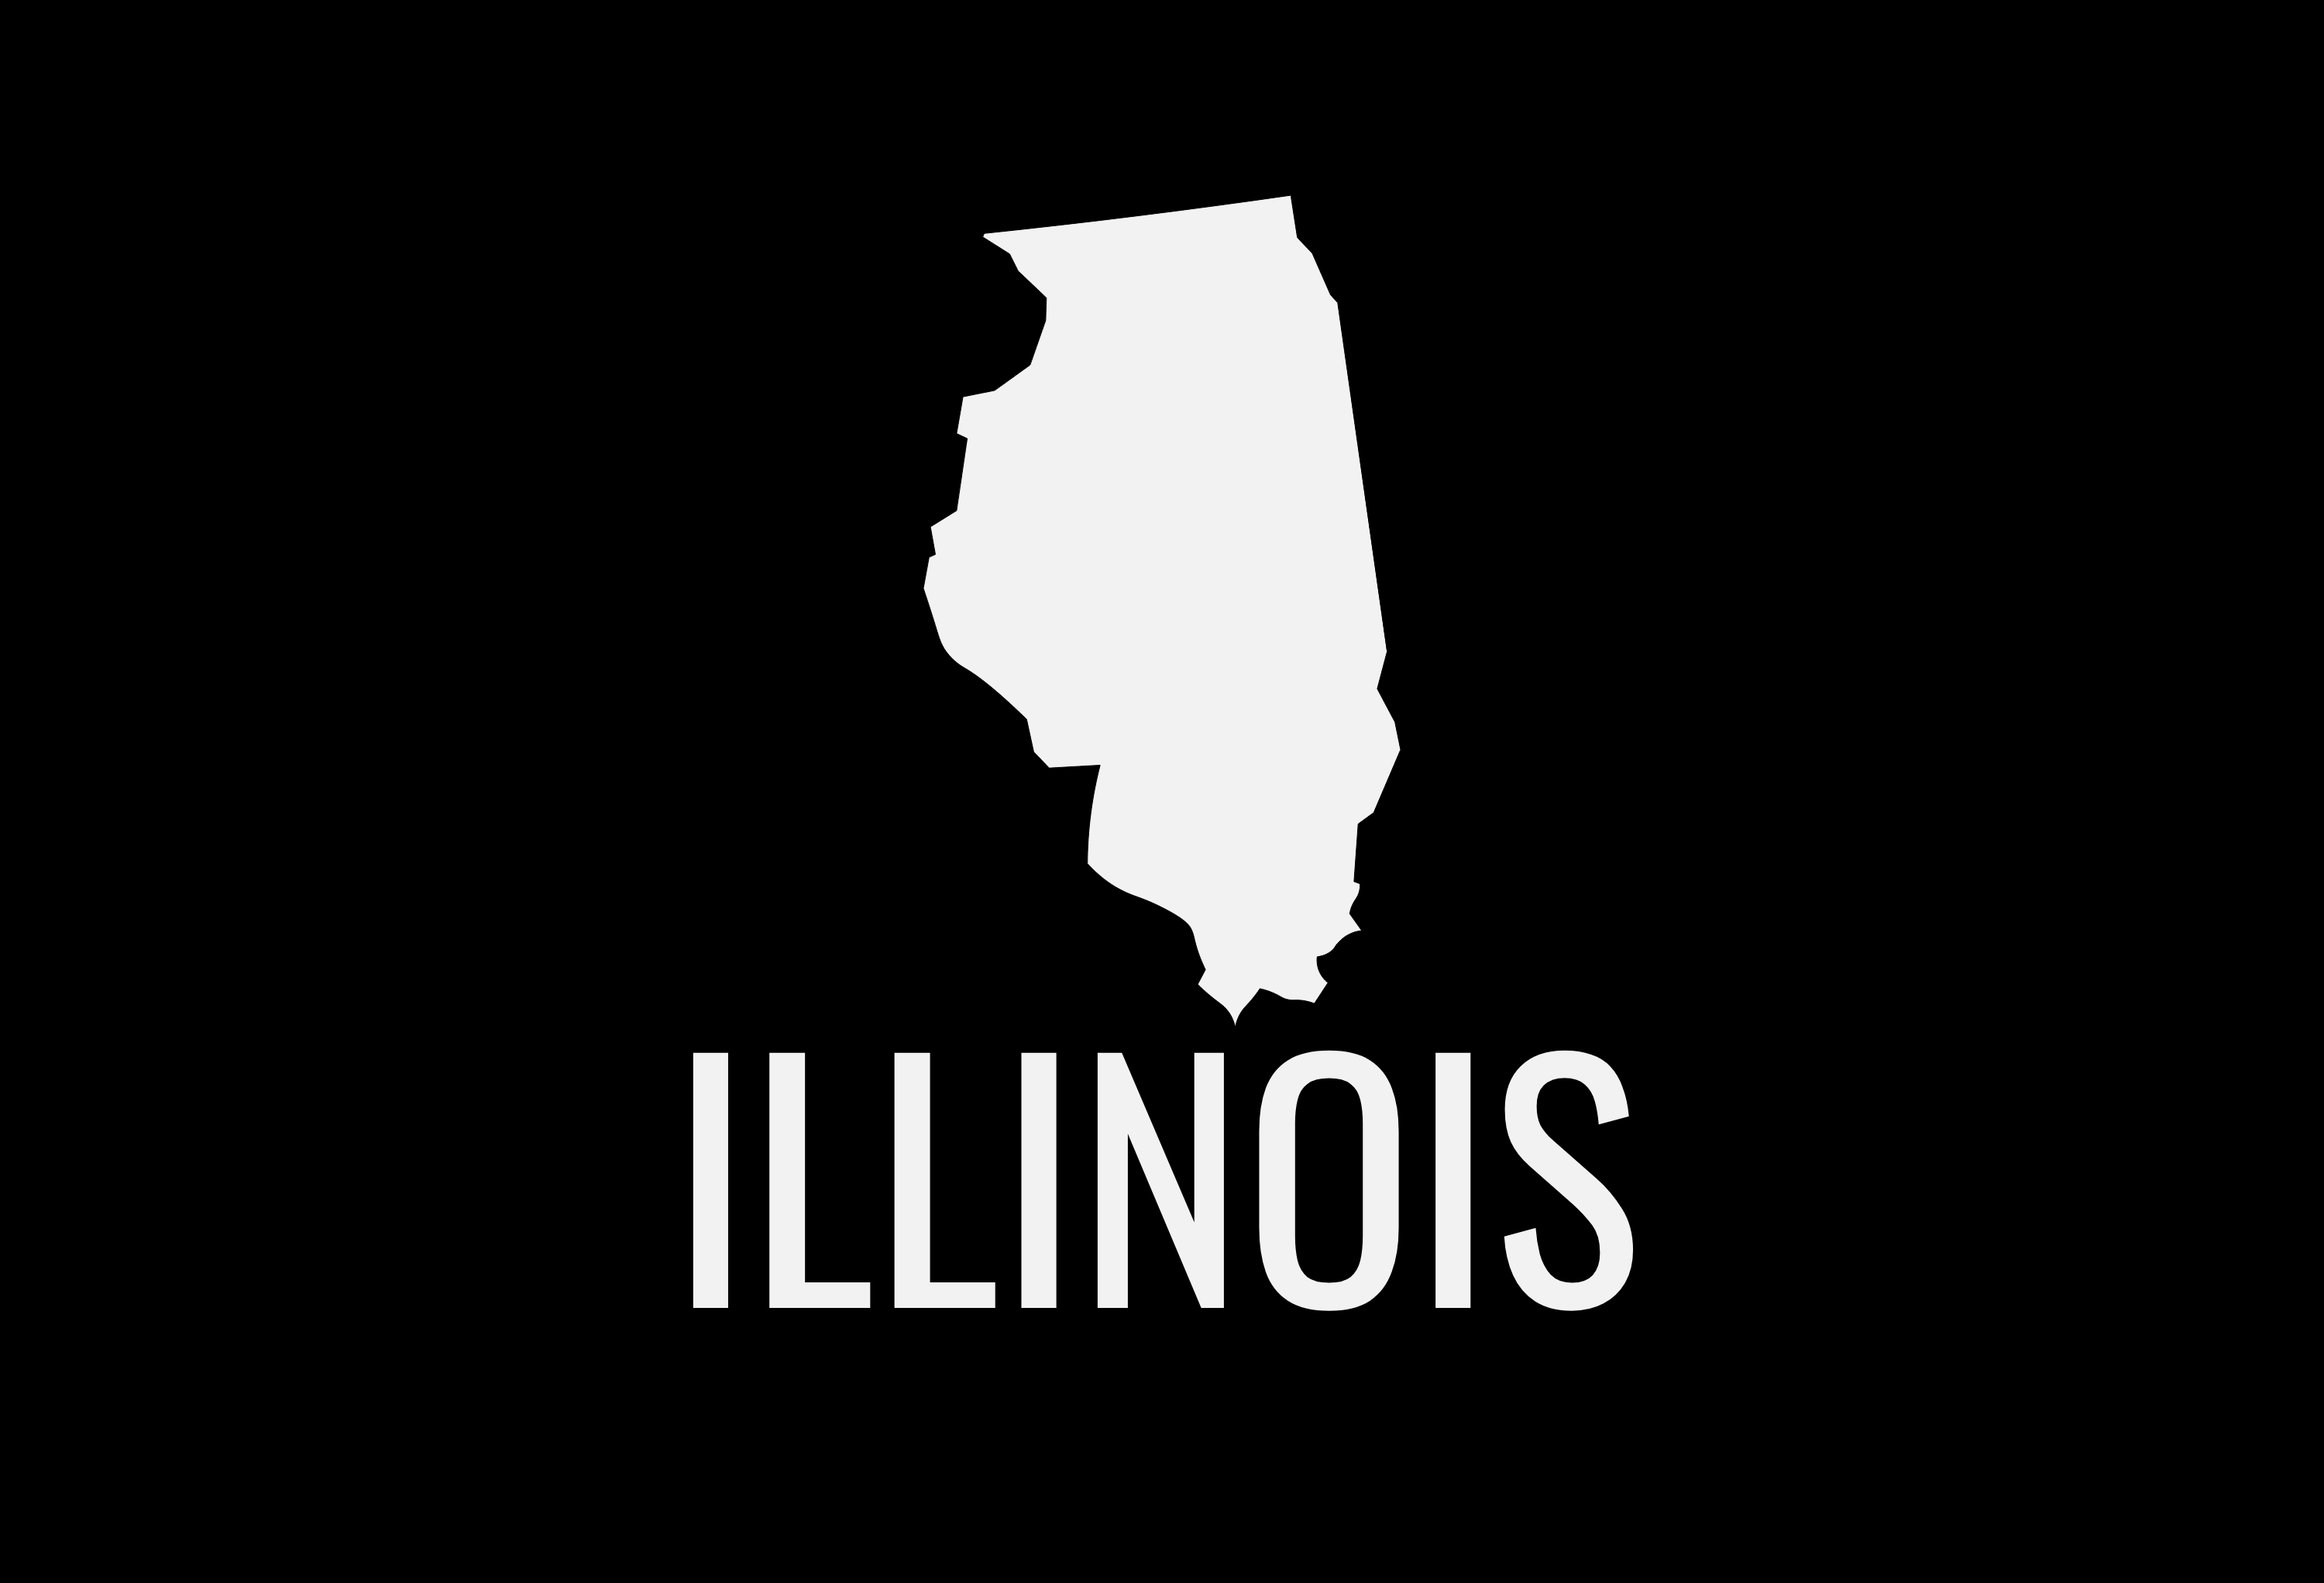 Illinois State Map Car Decal - Permanent Vinyl Sticker for Cars, Vehicle, Doors, Windows, Laptop, and more!